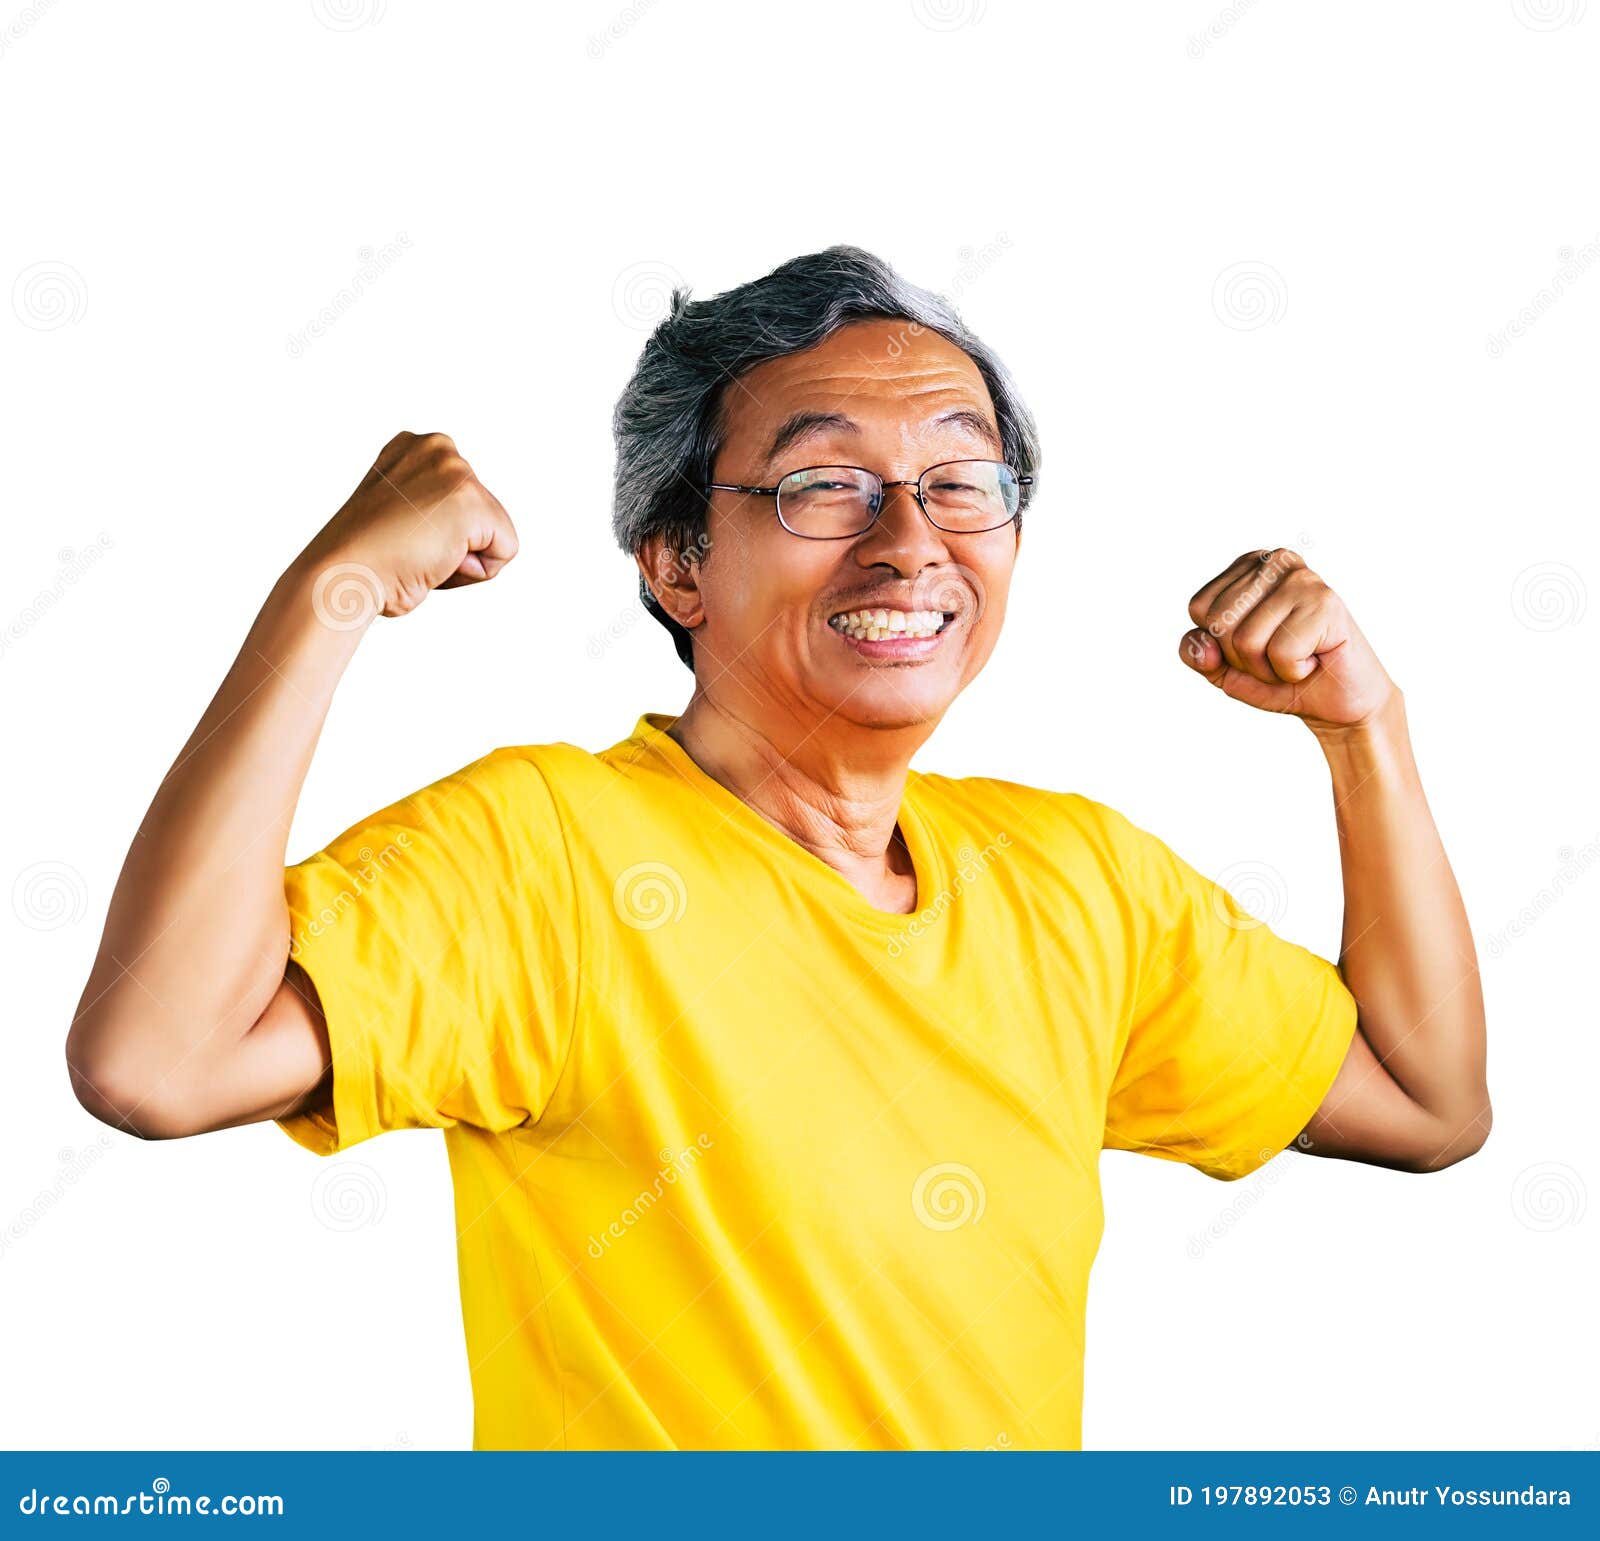 senior man showing off muscle for strong healthy lifestye concept  on white